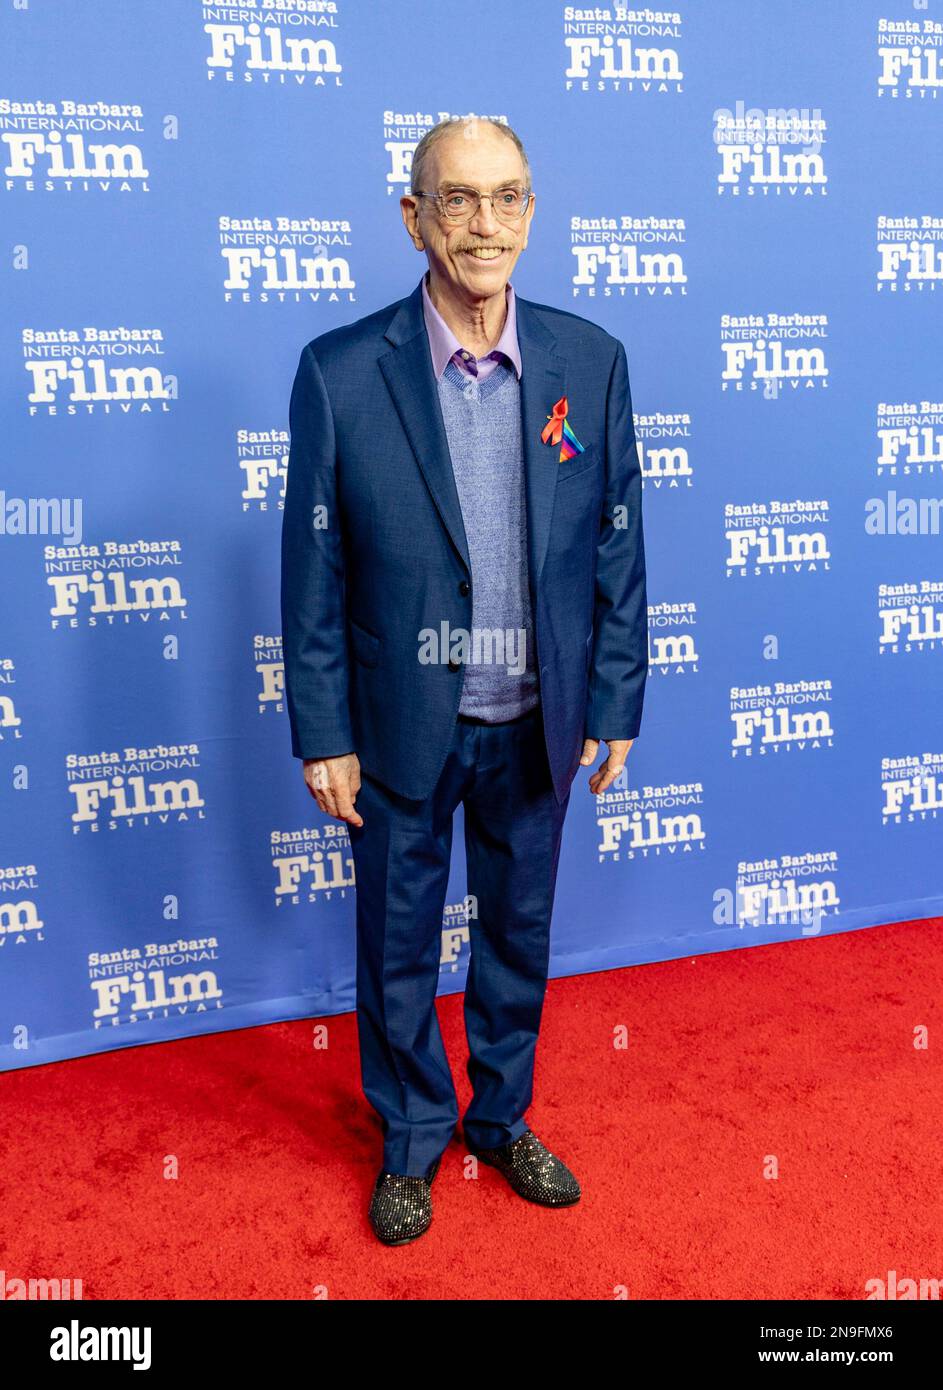 Santa Barbara, USA. 11th Feb, 2023. Rev. Steve Pieters (Commitment to Life) arrives at the 2023 Santa Barbara International Film Festival red carpet event to honor Jamie Lee Curtis with the Maltin Modern Master Award at the Arlington Theatre on February 11, 2023 in Santa Barbara, CA. (Photo by Rod Rolle/Sipa USA) Credit: Sipa USA/Alamy Live News Stock Photo